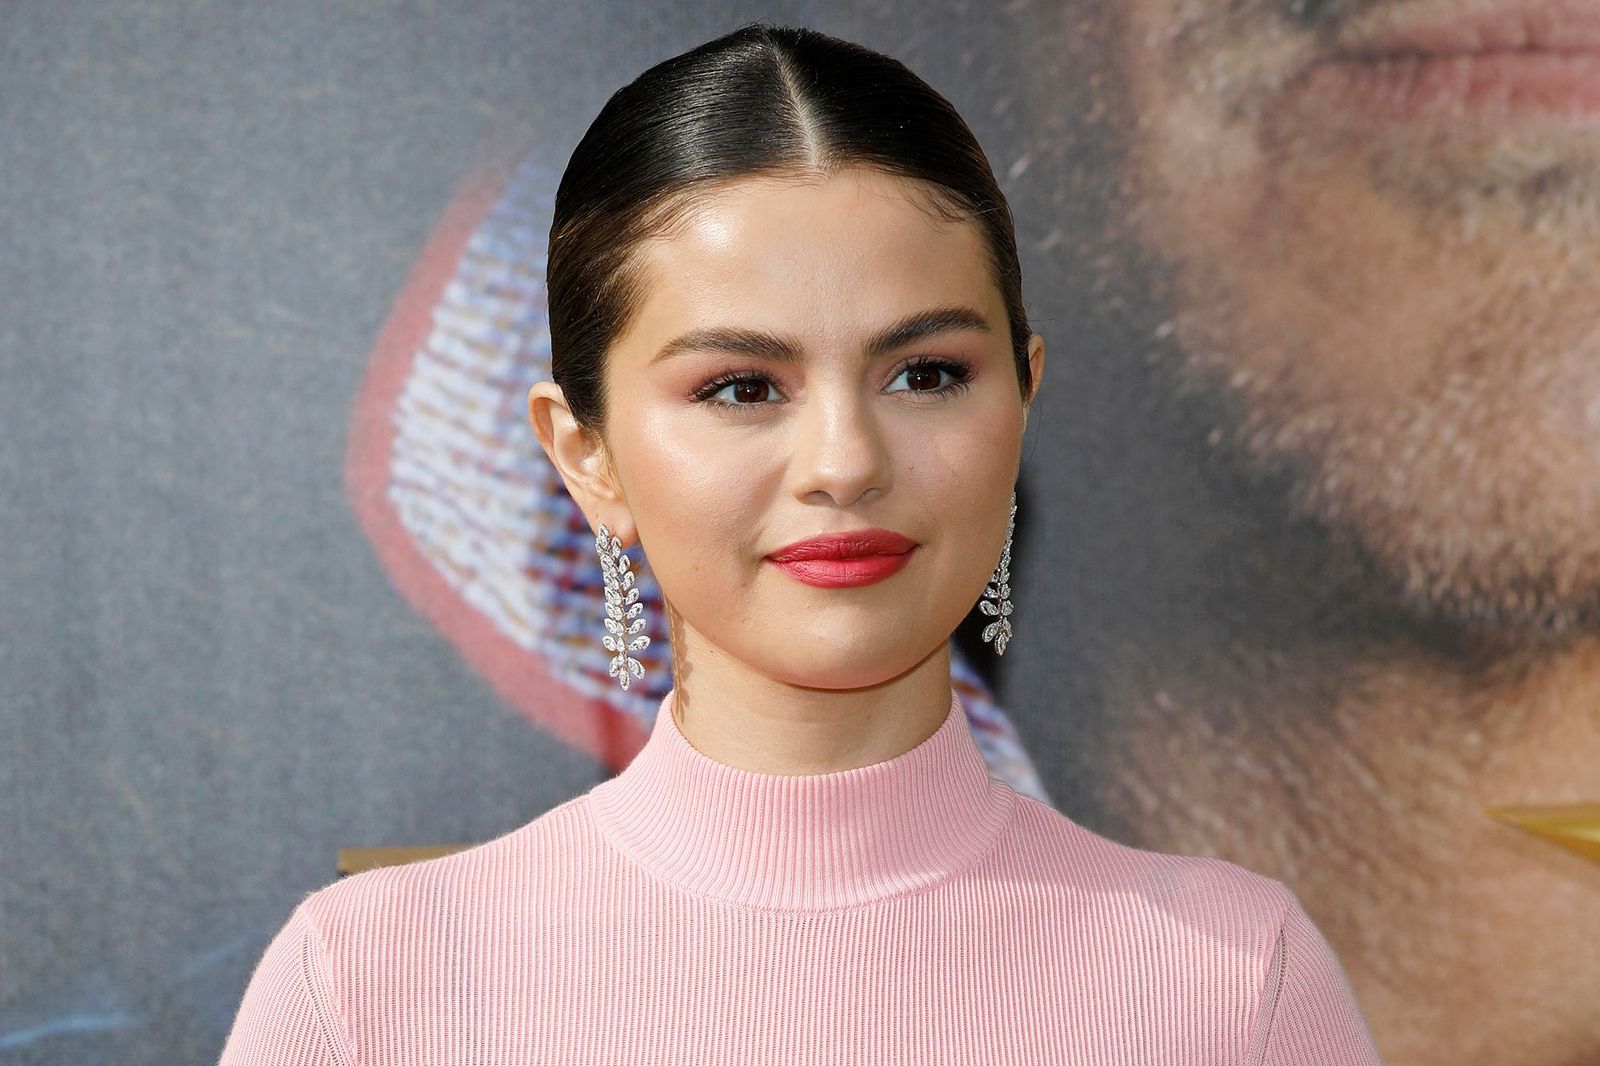 Selena Gomez Reveals She Has Bipolar Disorder Says, 'I Think People Get Scared Of That'